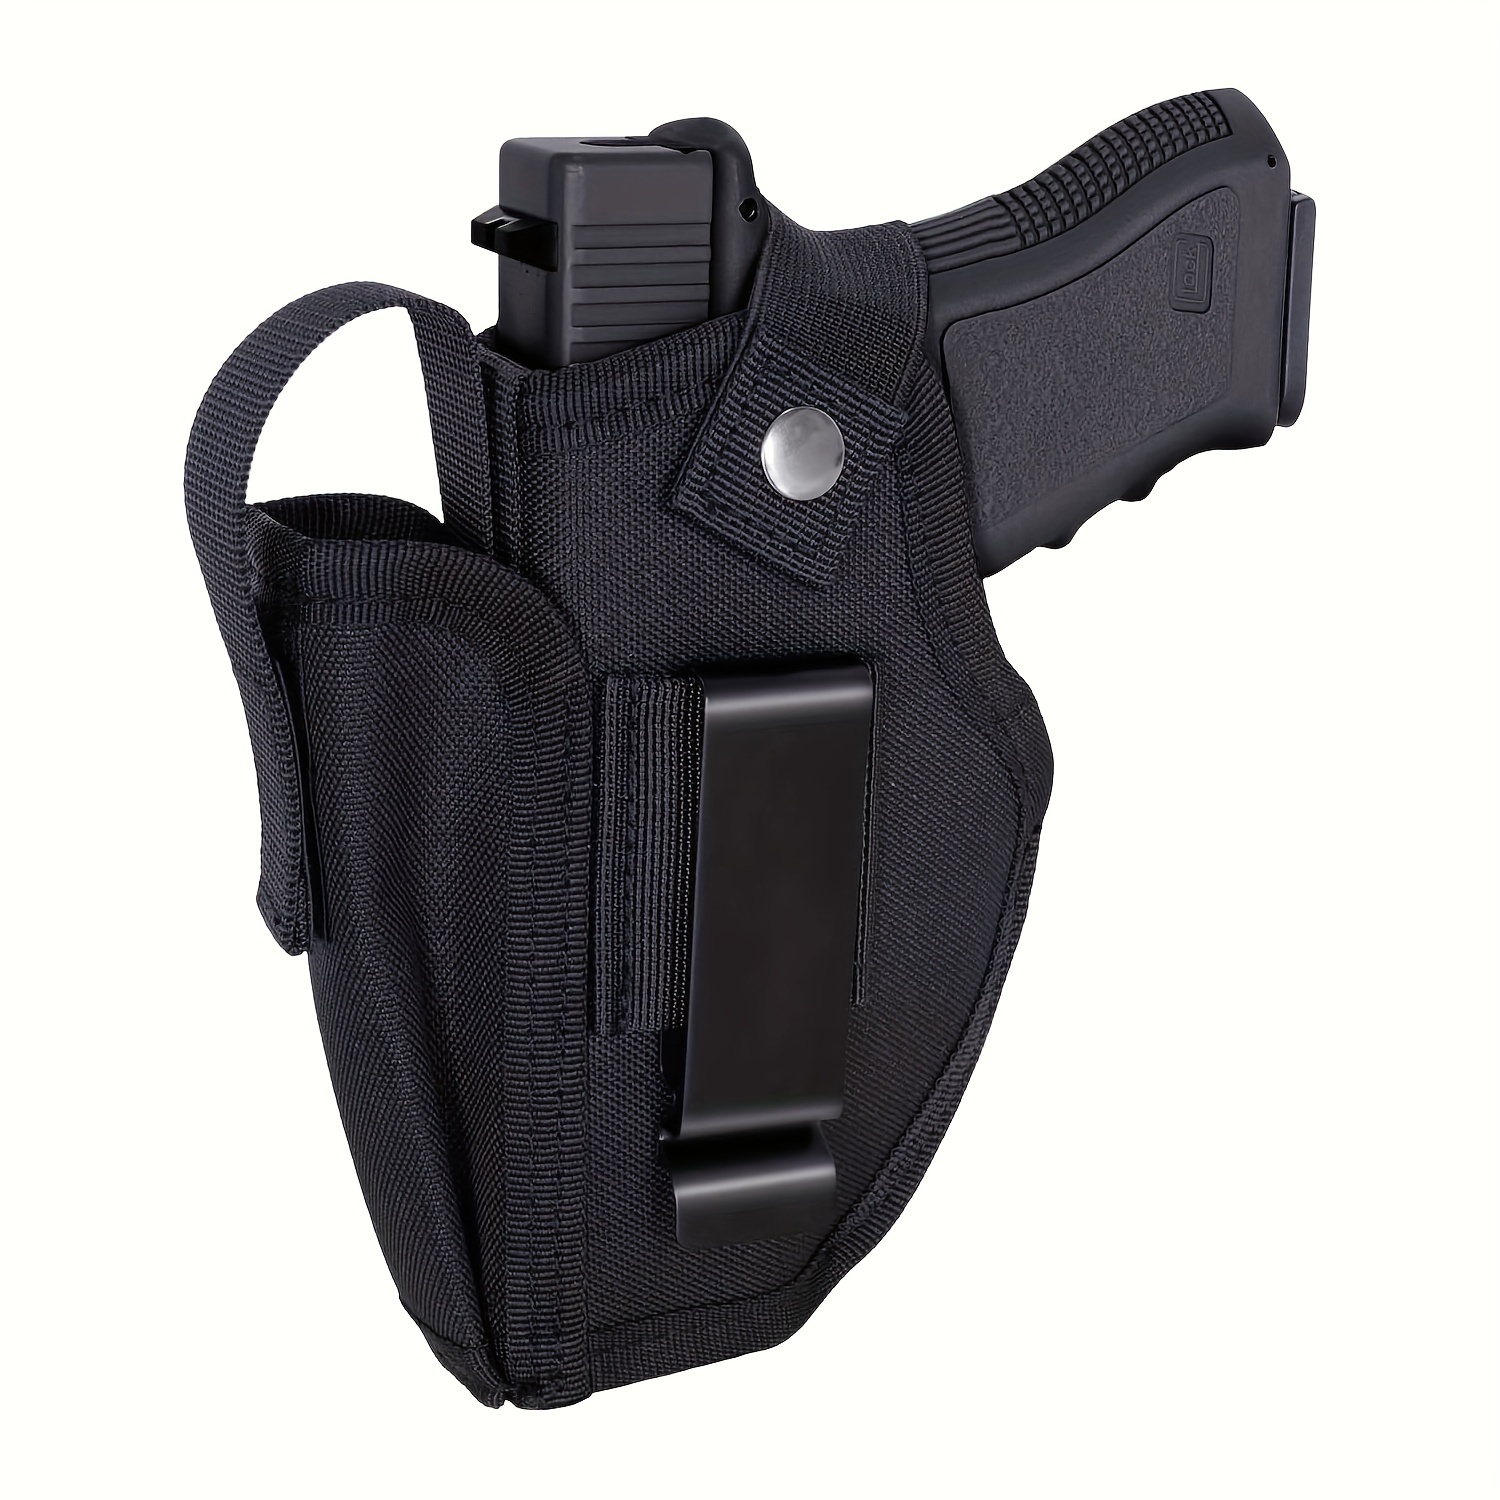 Gun Holster-fits Compact To Large Handguns Concealed Carry Shoulder Holster  With Magazine Pouch Compatible With Right And Left Hand Gun Accessories